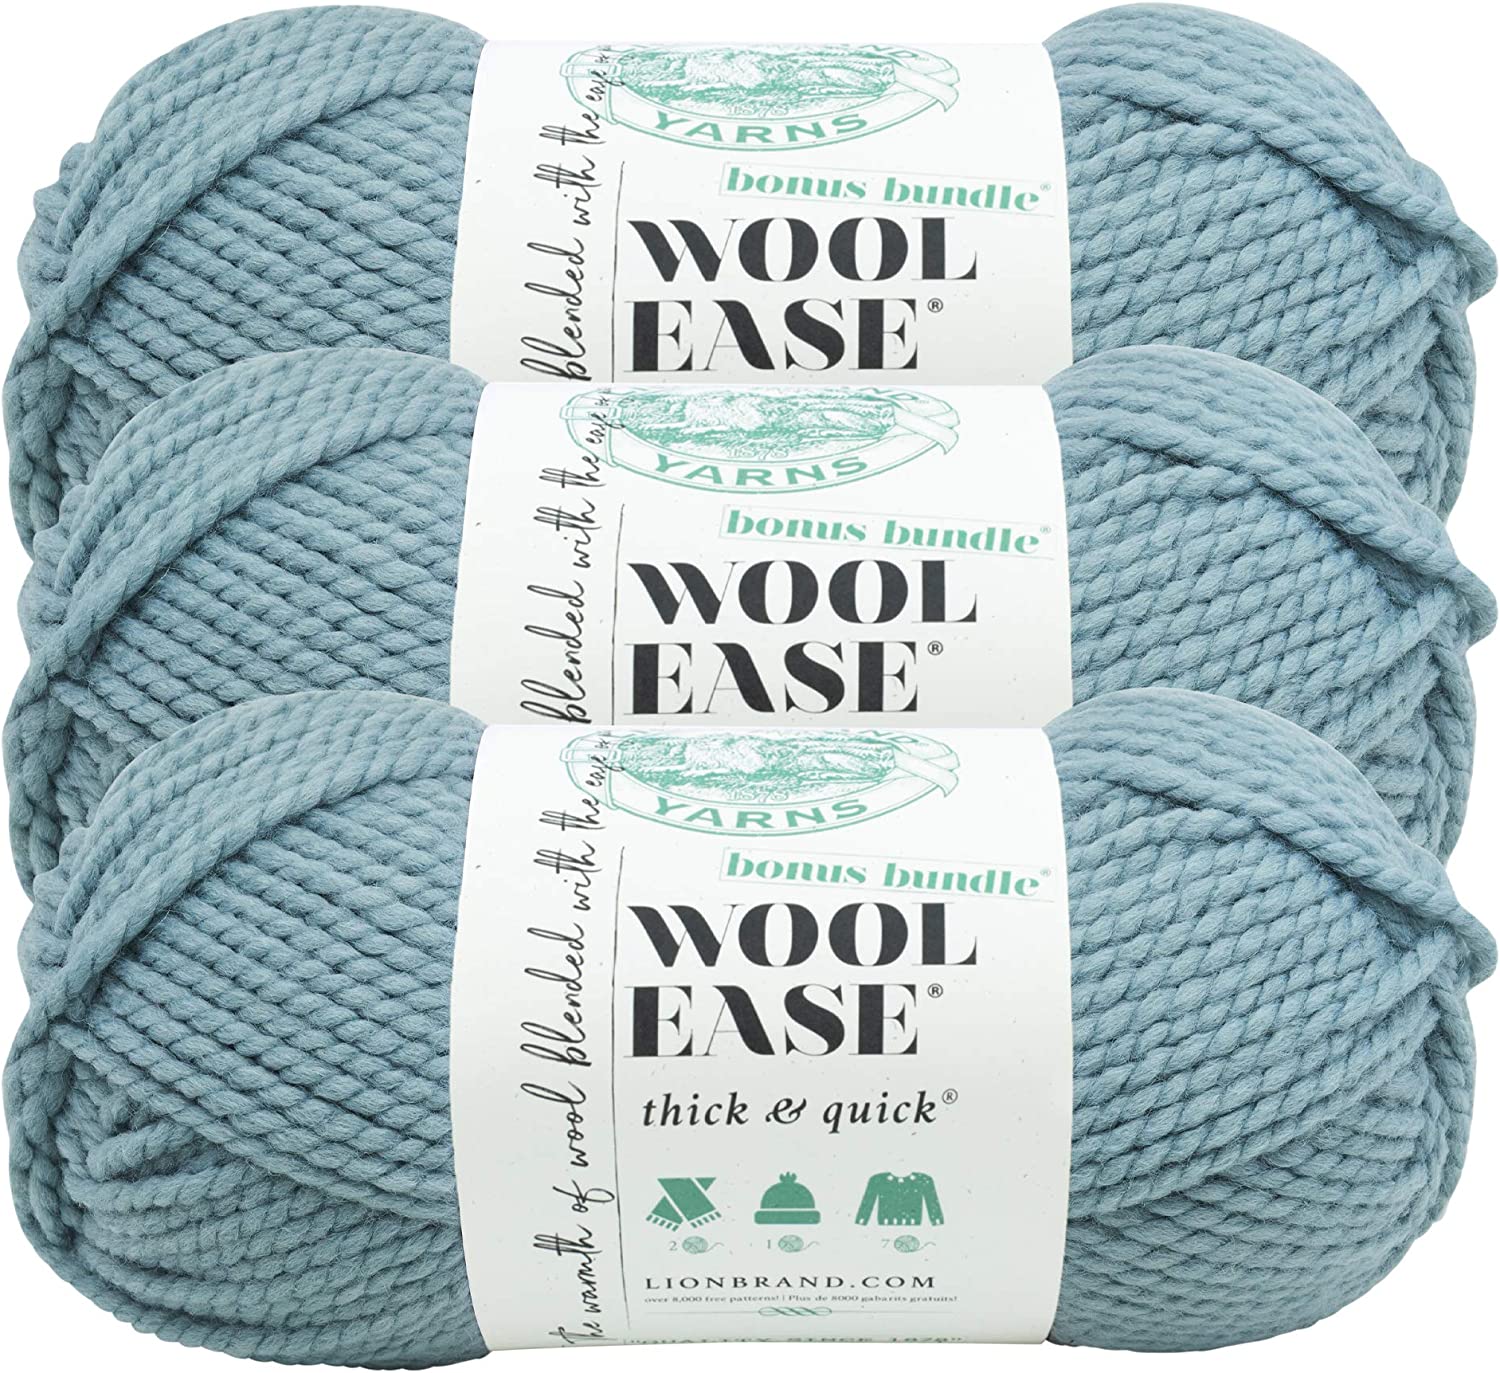 Lion Brand Wool Ease Thick and Quick Yarn (3-Pack) Crimson Stripes 640-602